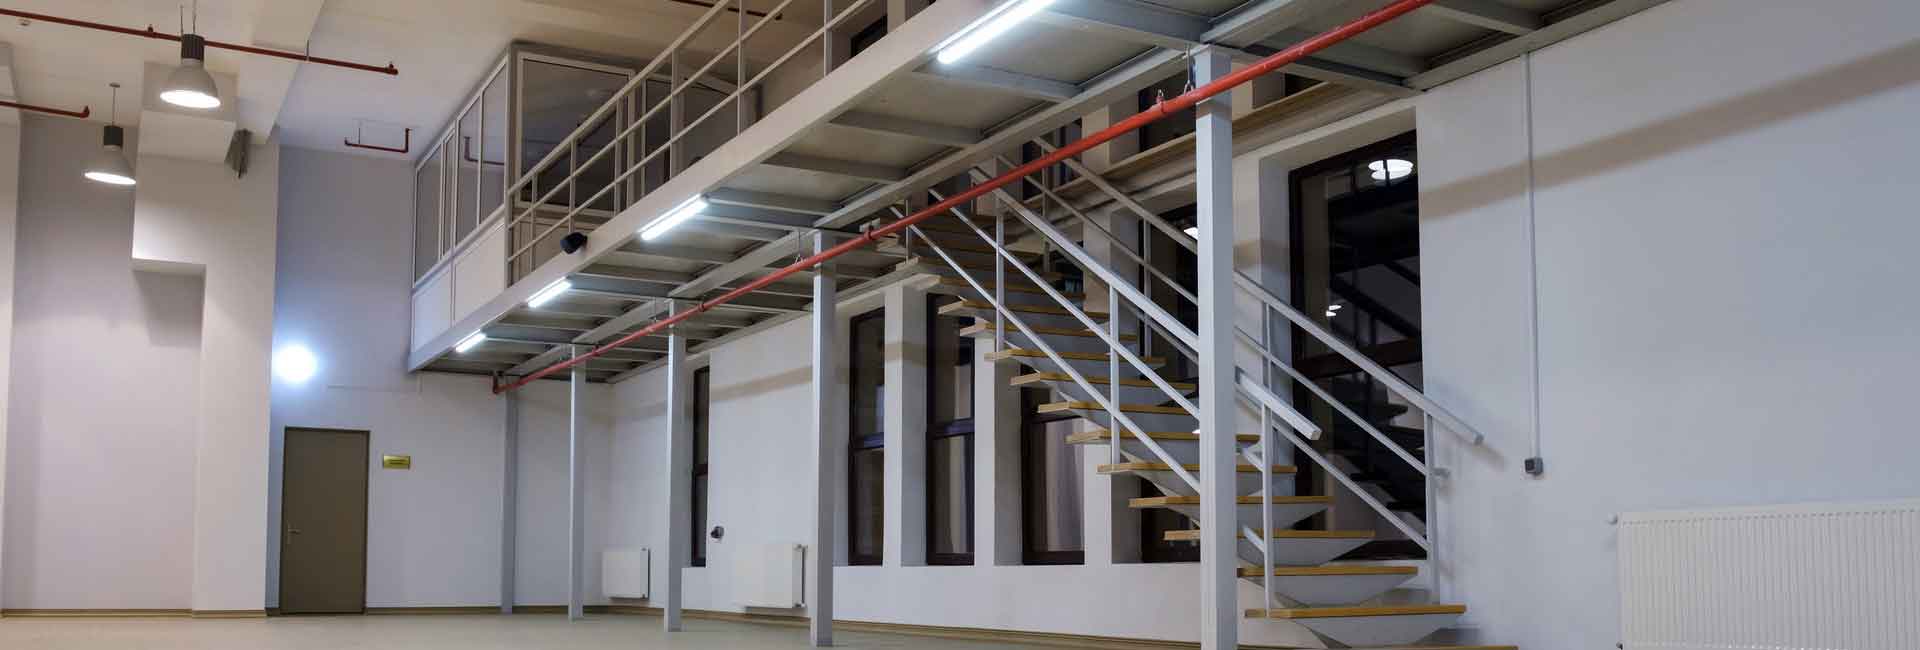 5 BENEFITS OF MEZZANINE FLOORS FOR YOUR WORKPLACE